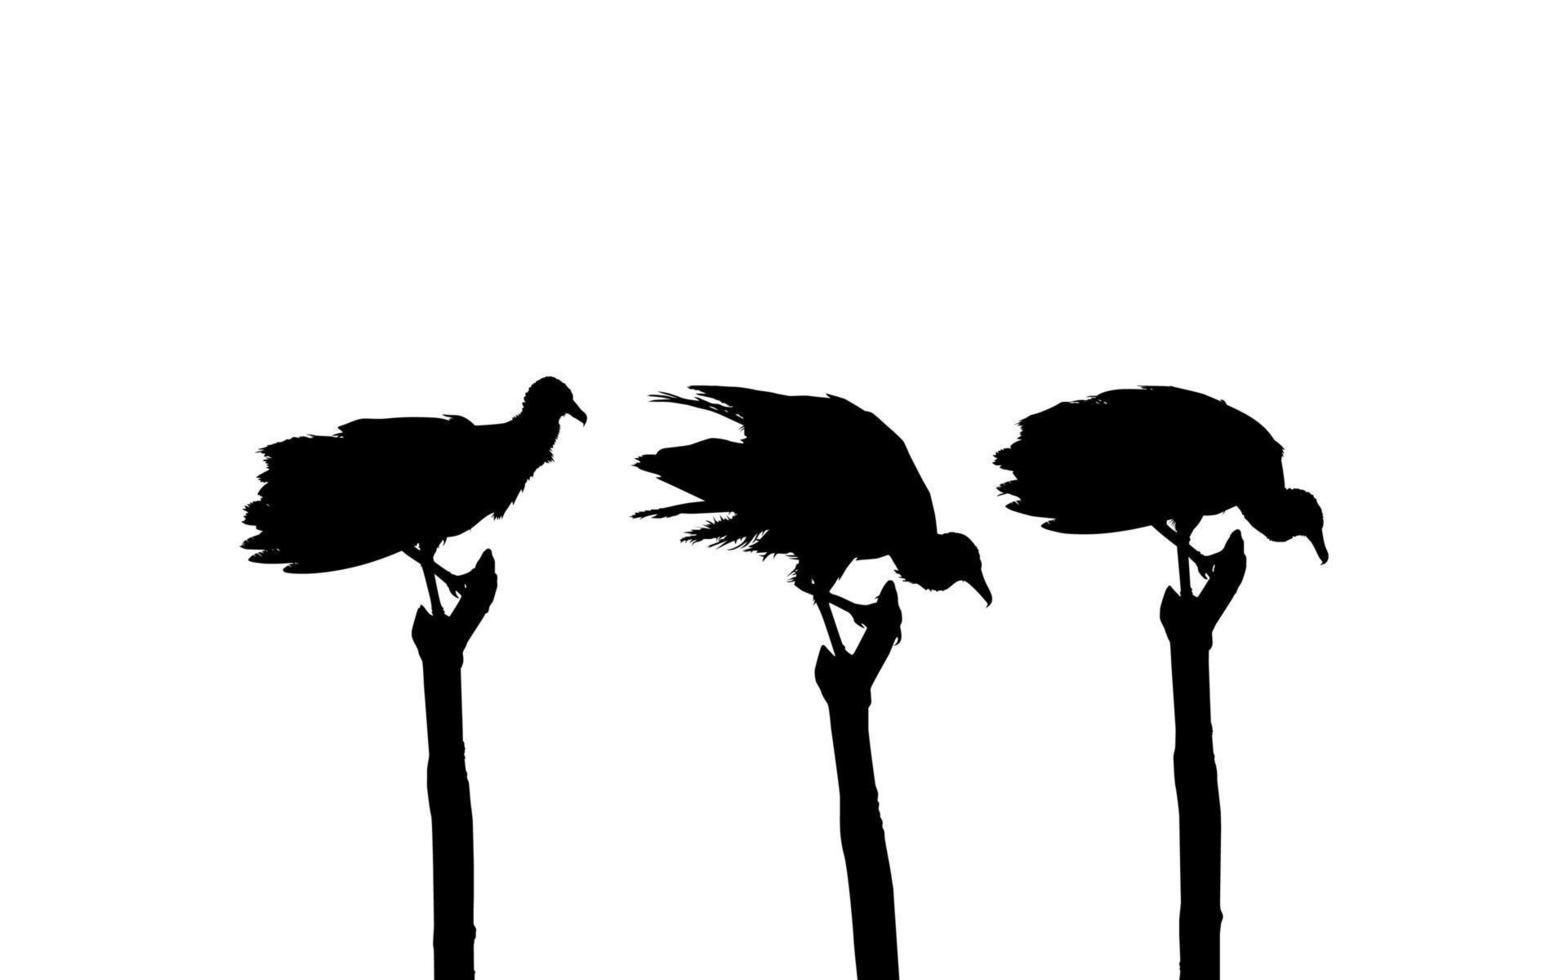 Silhouette of the Flock of the Black Vulture Bird, Based on my Photography as Image Reference, Location in Nickerie, Suriname, South America. Vector Illustration